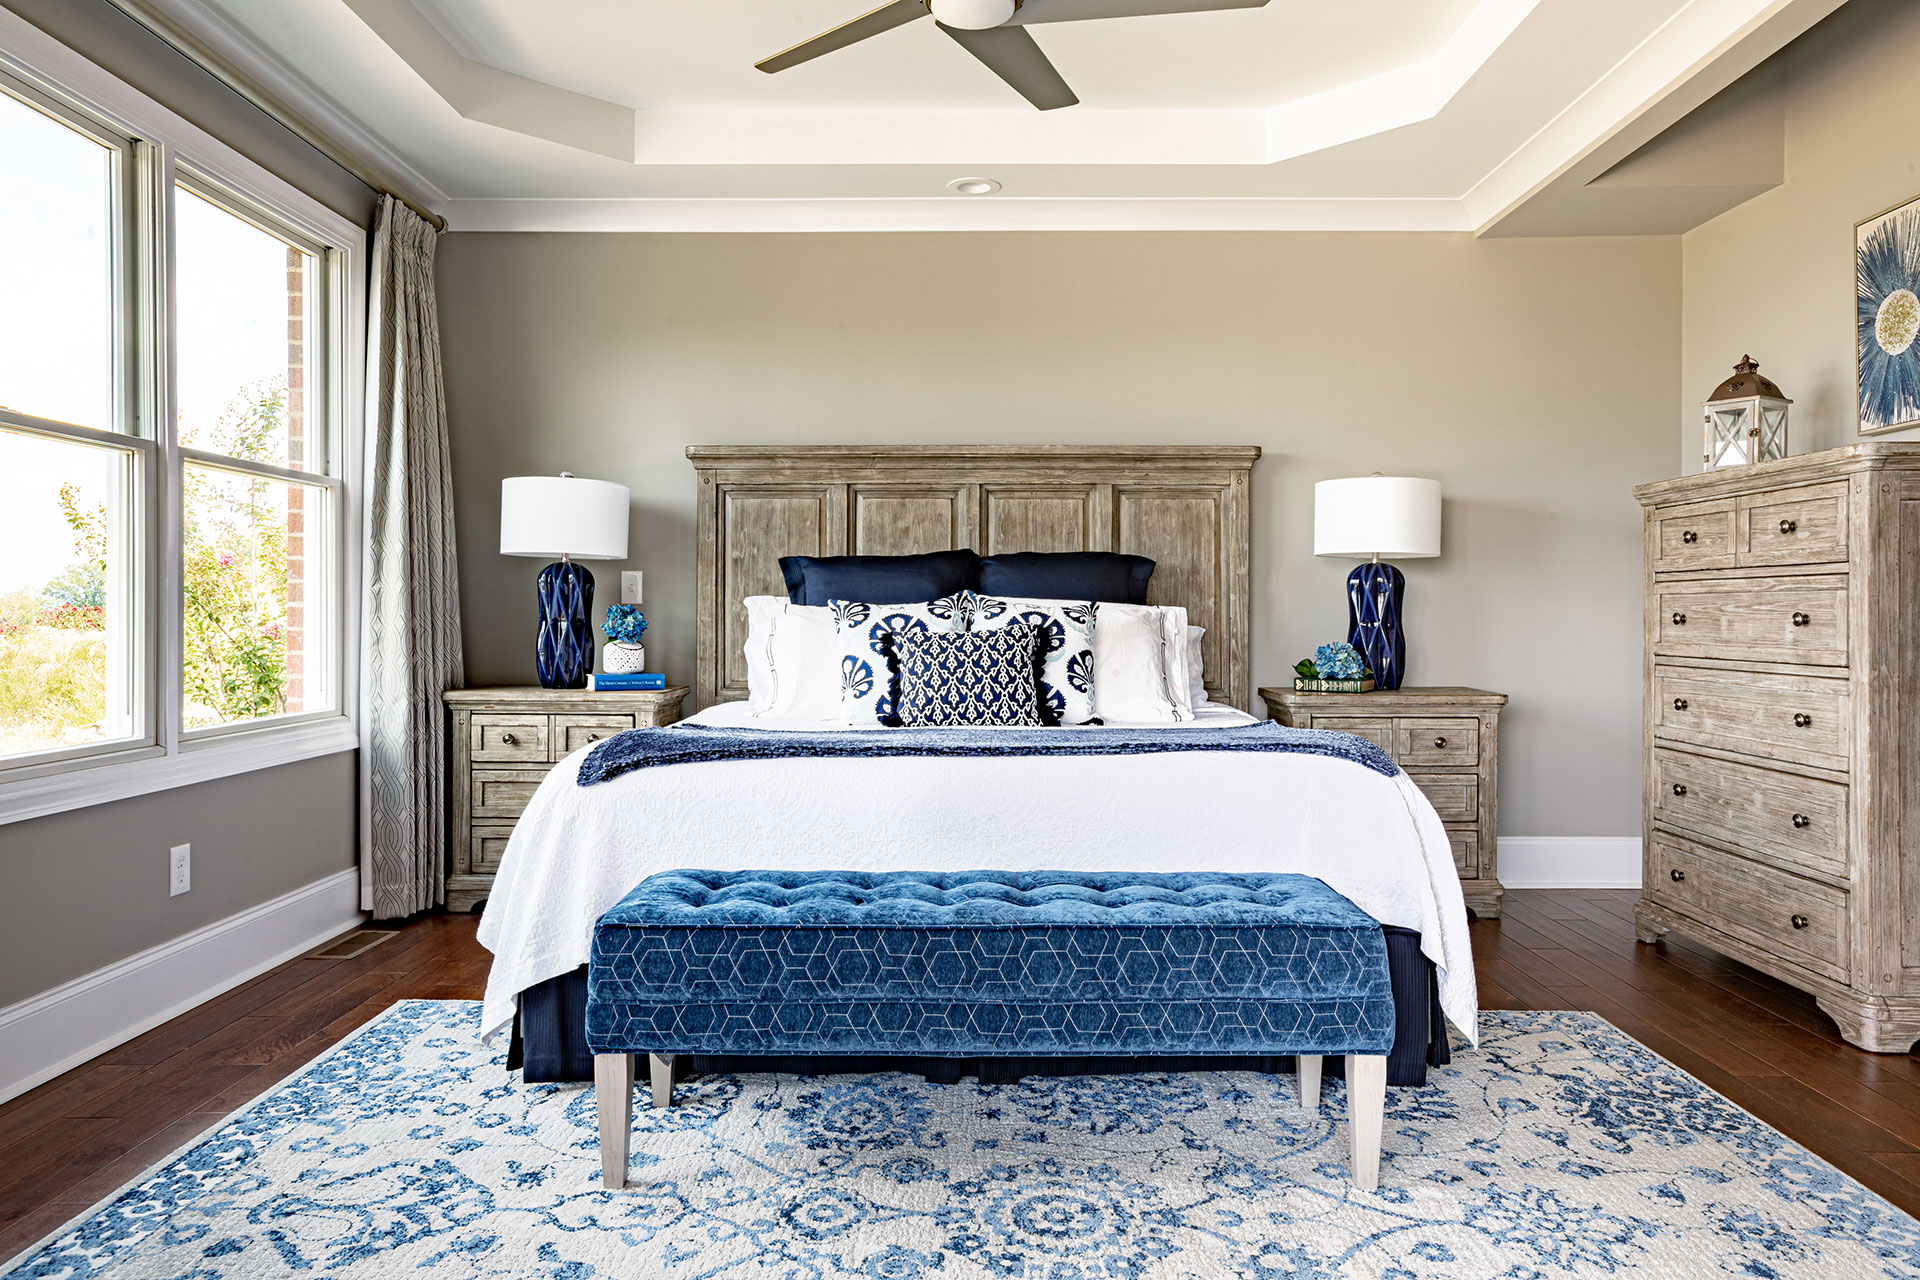 A photo of a serene and elegant bedroom with a white and blue upholstered bed, two nightstands, a dresser, and a cozy sitting area.